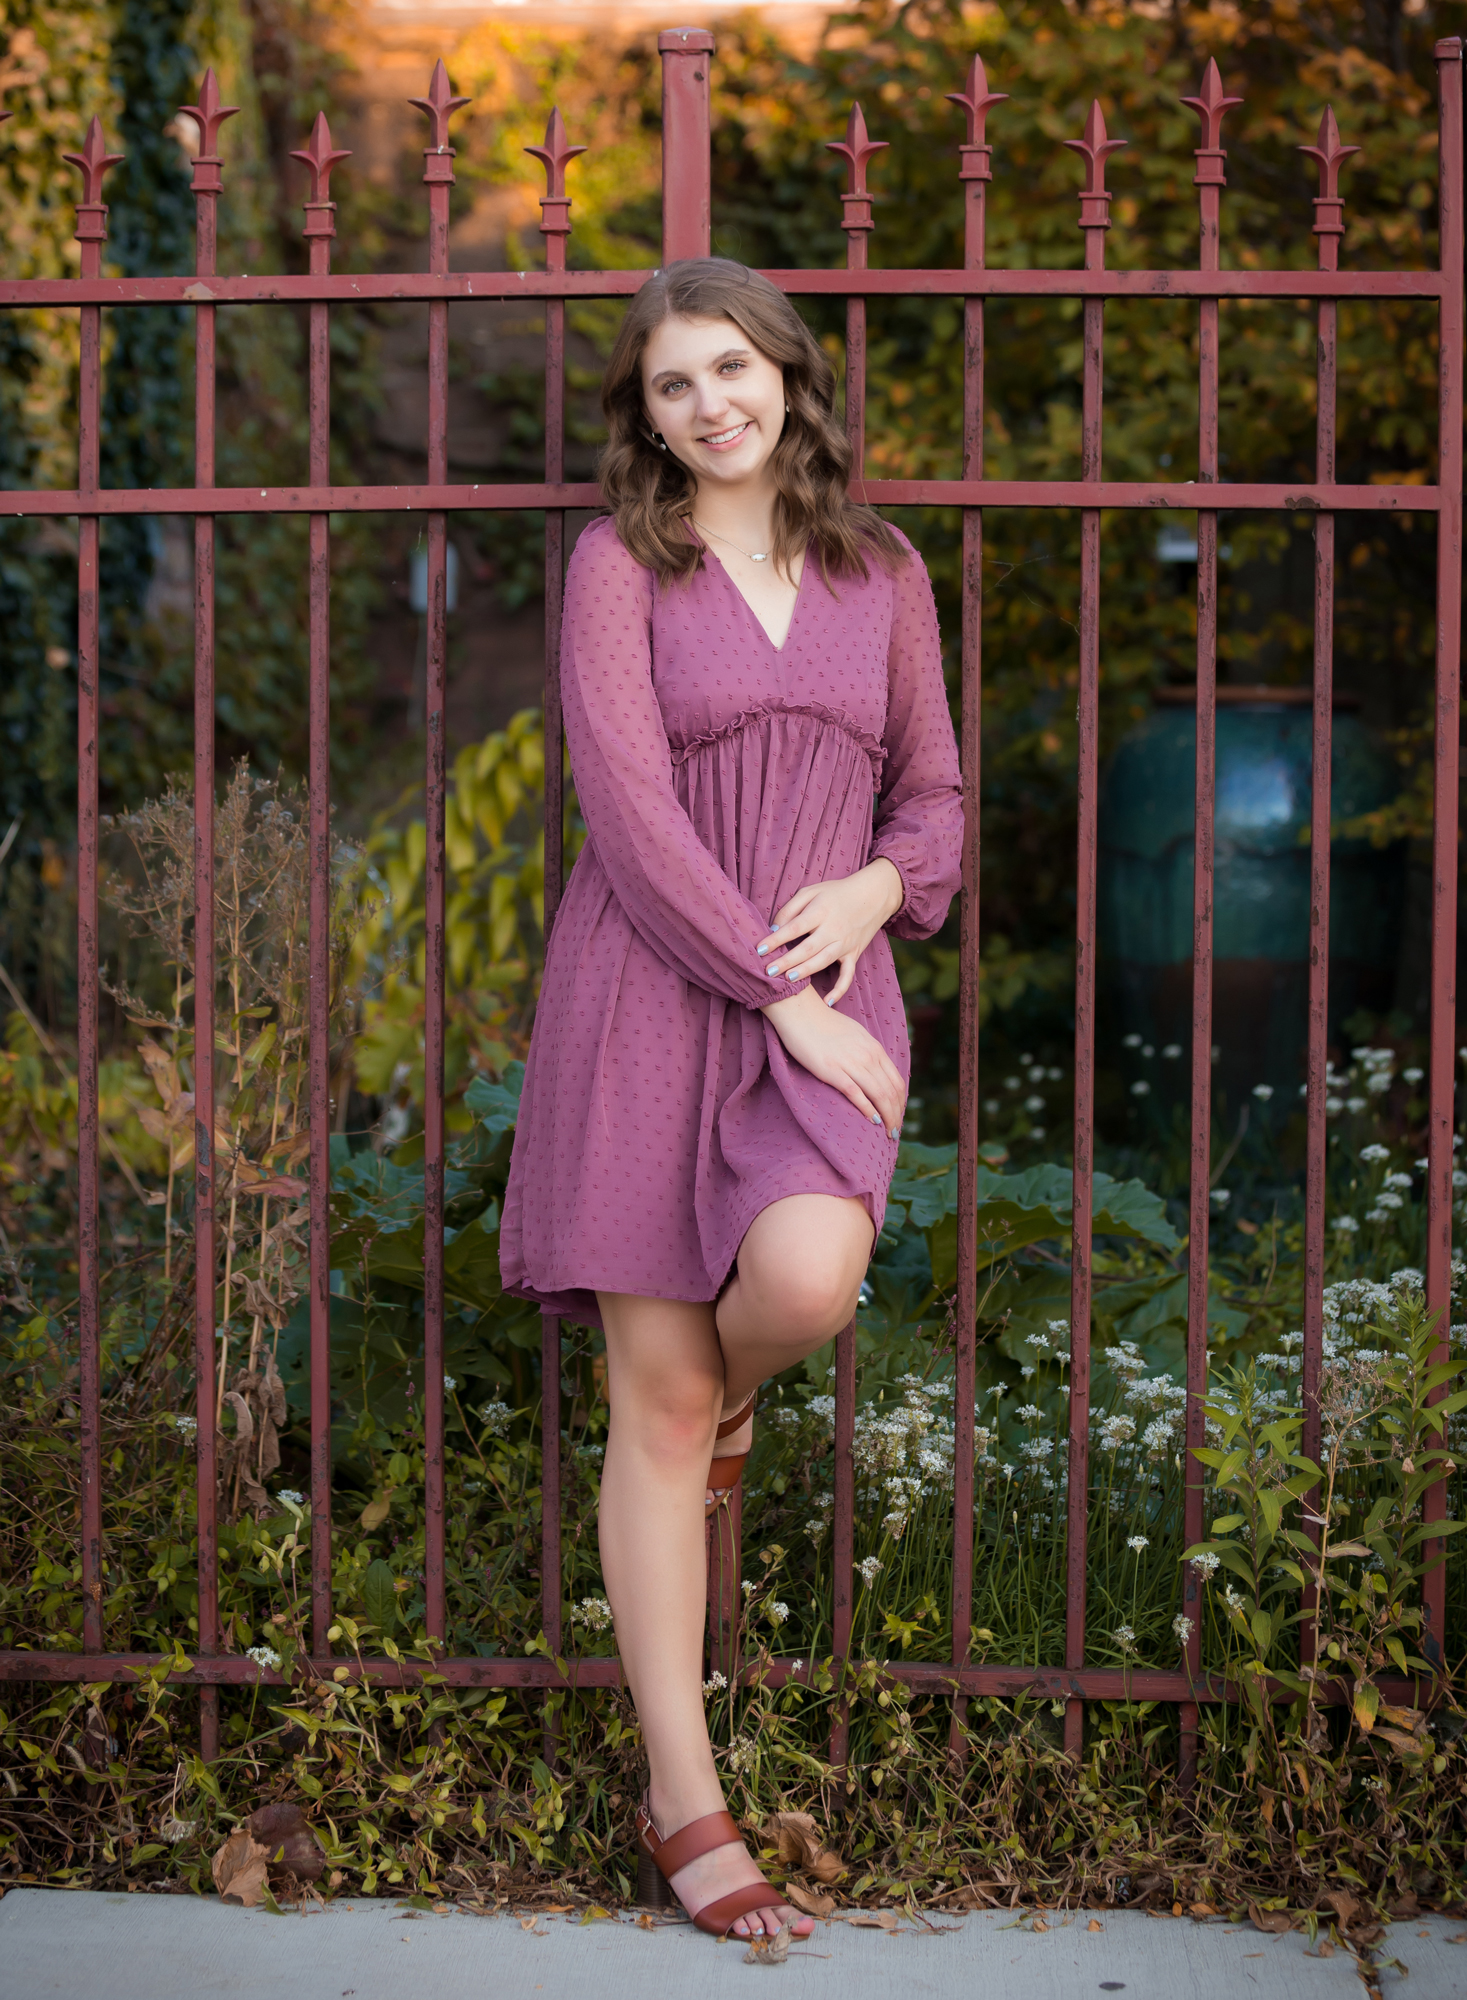 brown-haired-girl-in-raspberry-dress-leaning-against-fence